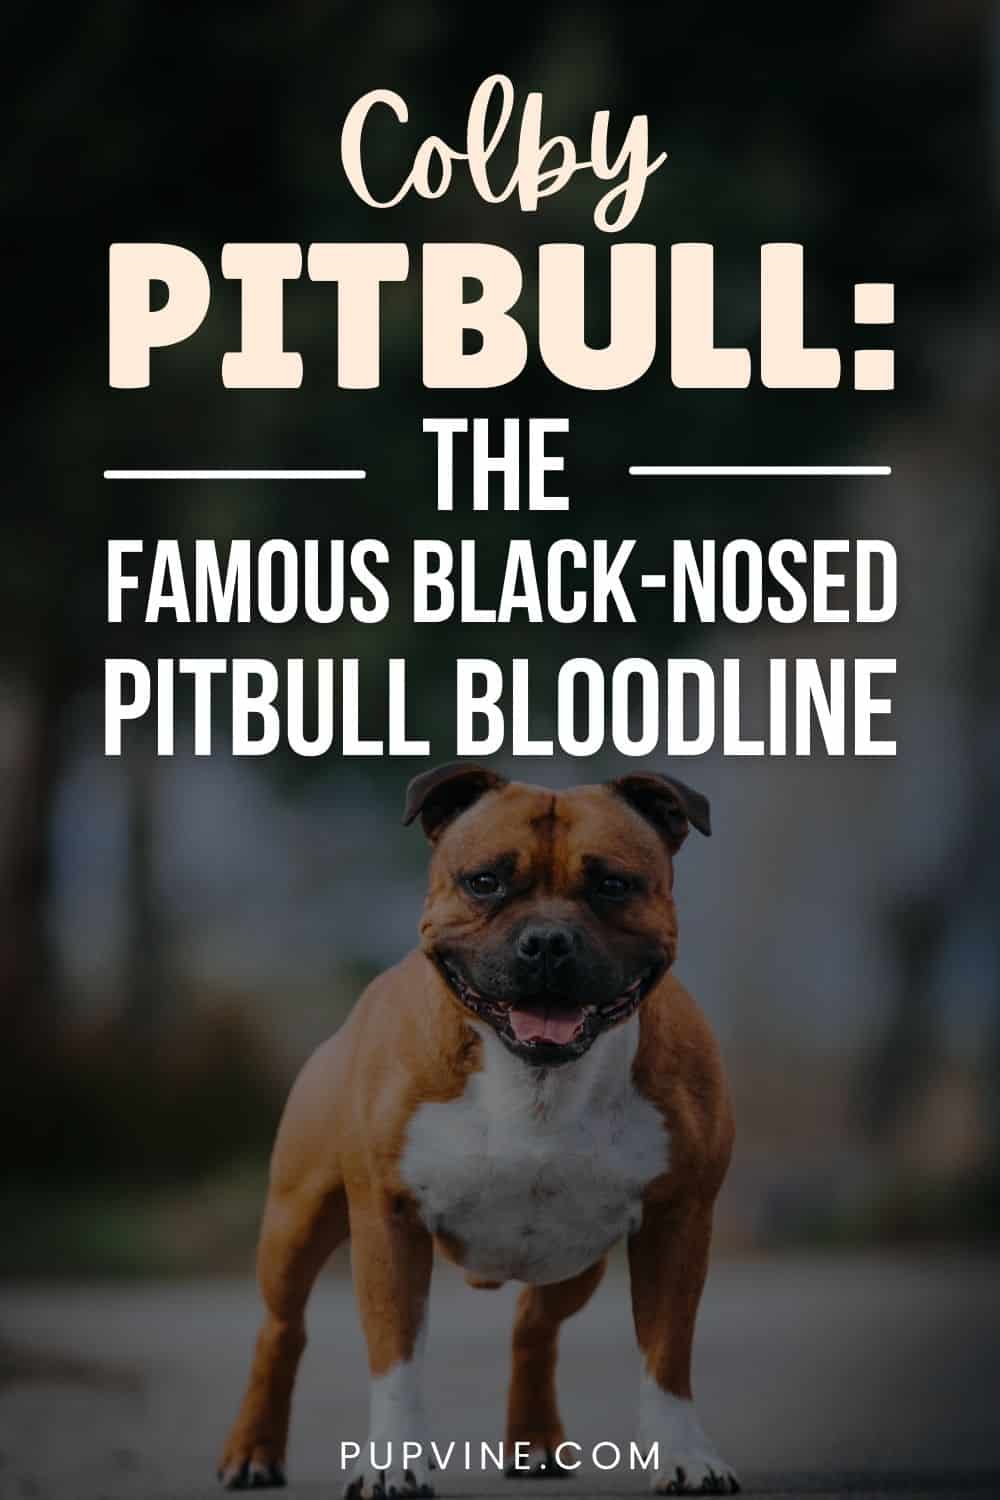 Colby Pitbull The Famous Black-Nosed Pitbull Bloodline